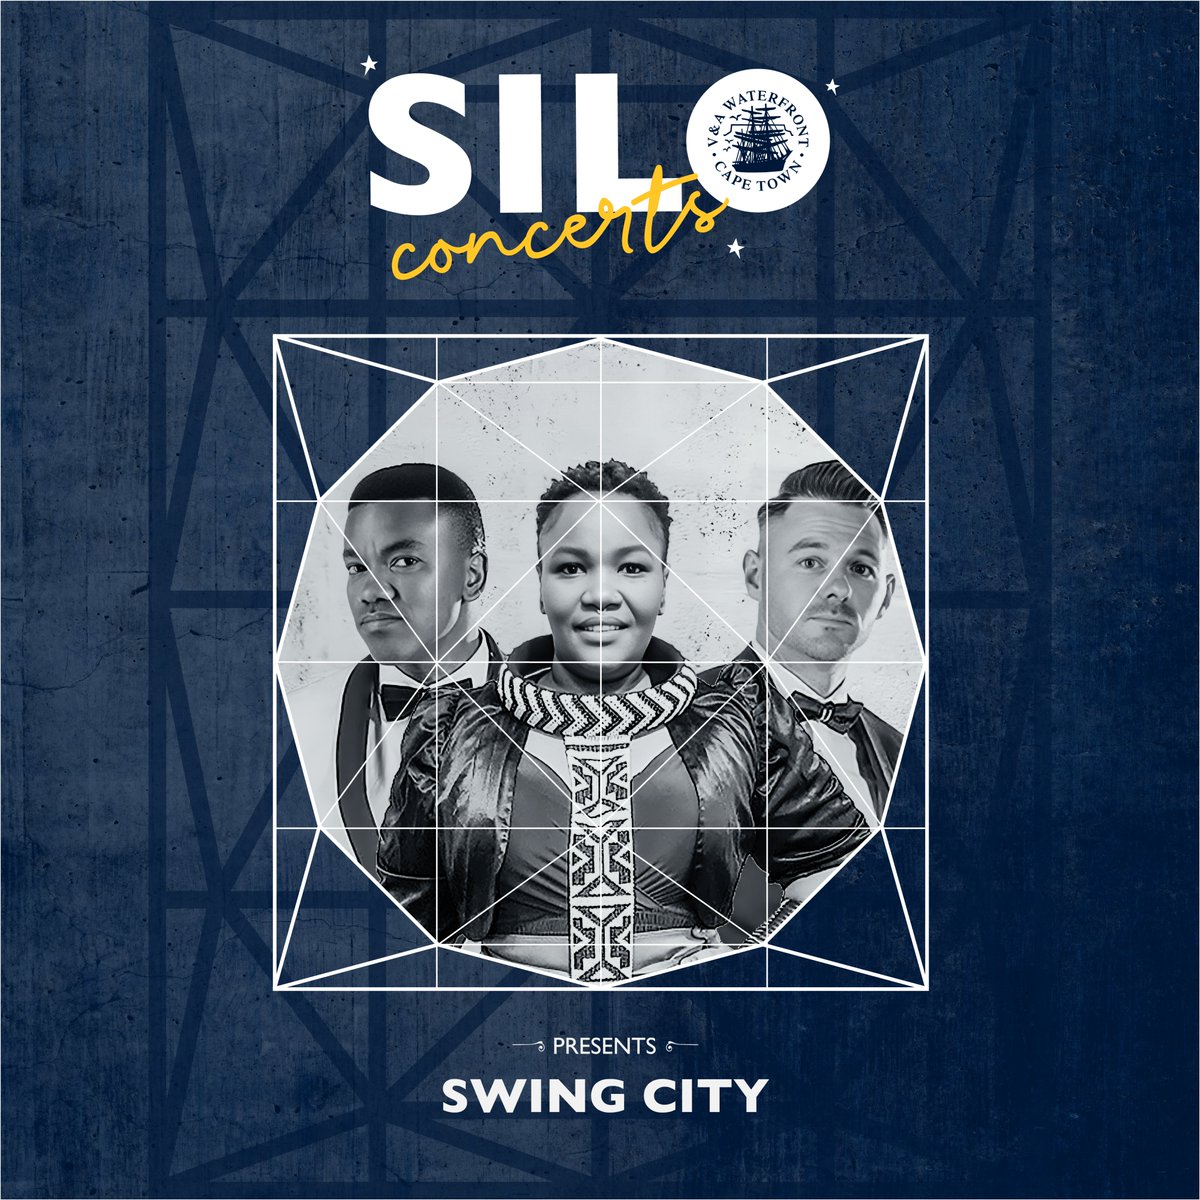 Silo Concerts is back with another exciting performance from Swing City! 

Get ready to dance the night away on December 1st at 7 pm. You won't want to miss it, so spread the word and let your family and friends know.

#vandawaterfront #myVAourjoy #siloconcerts